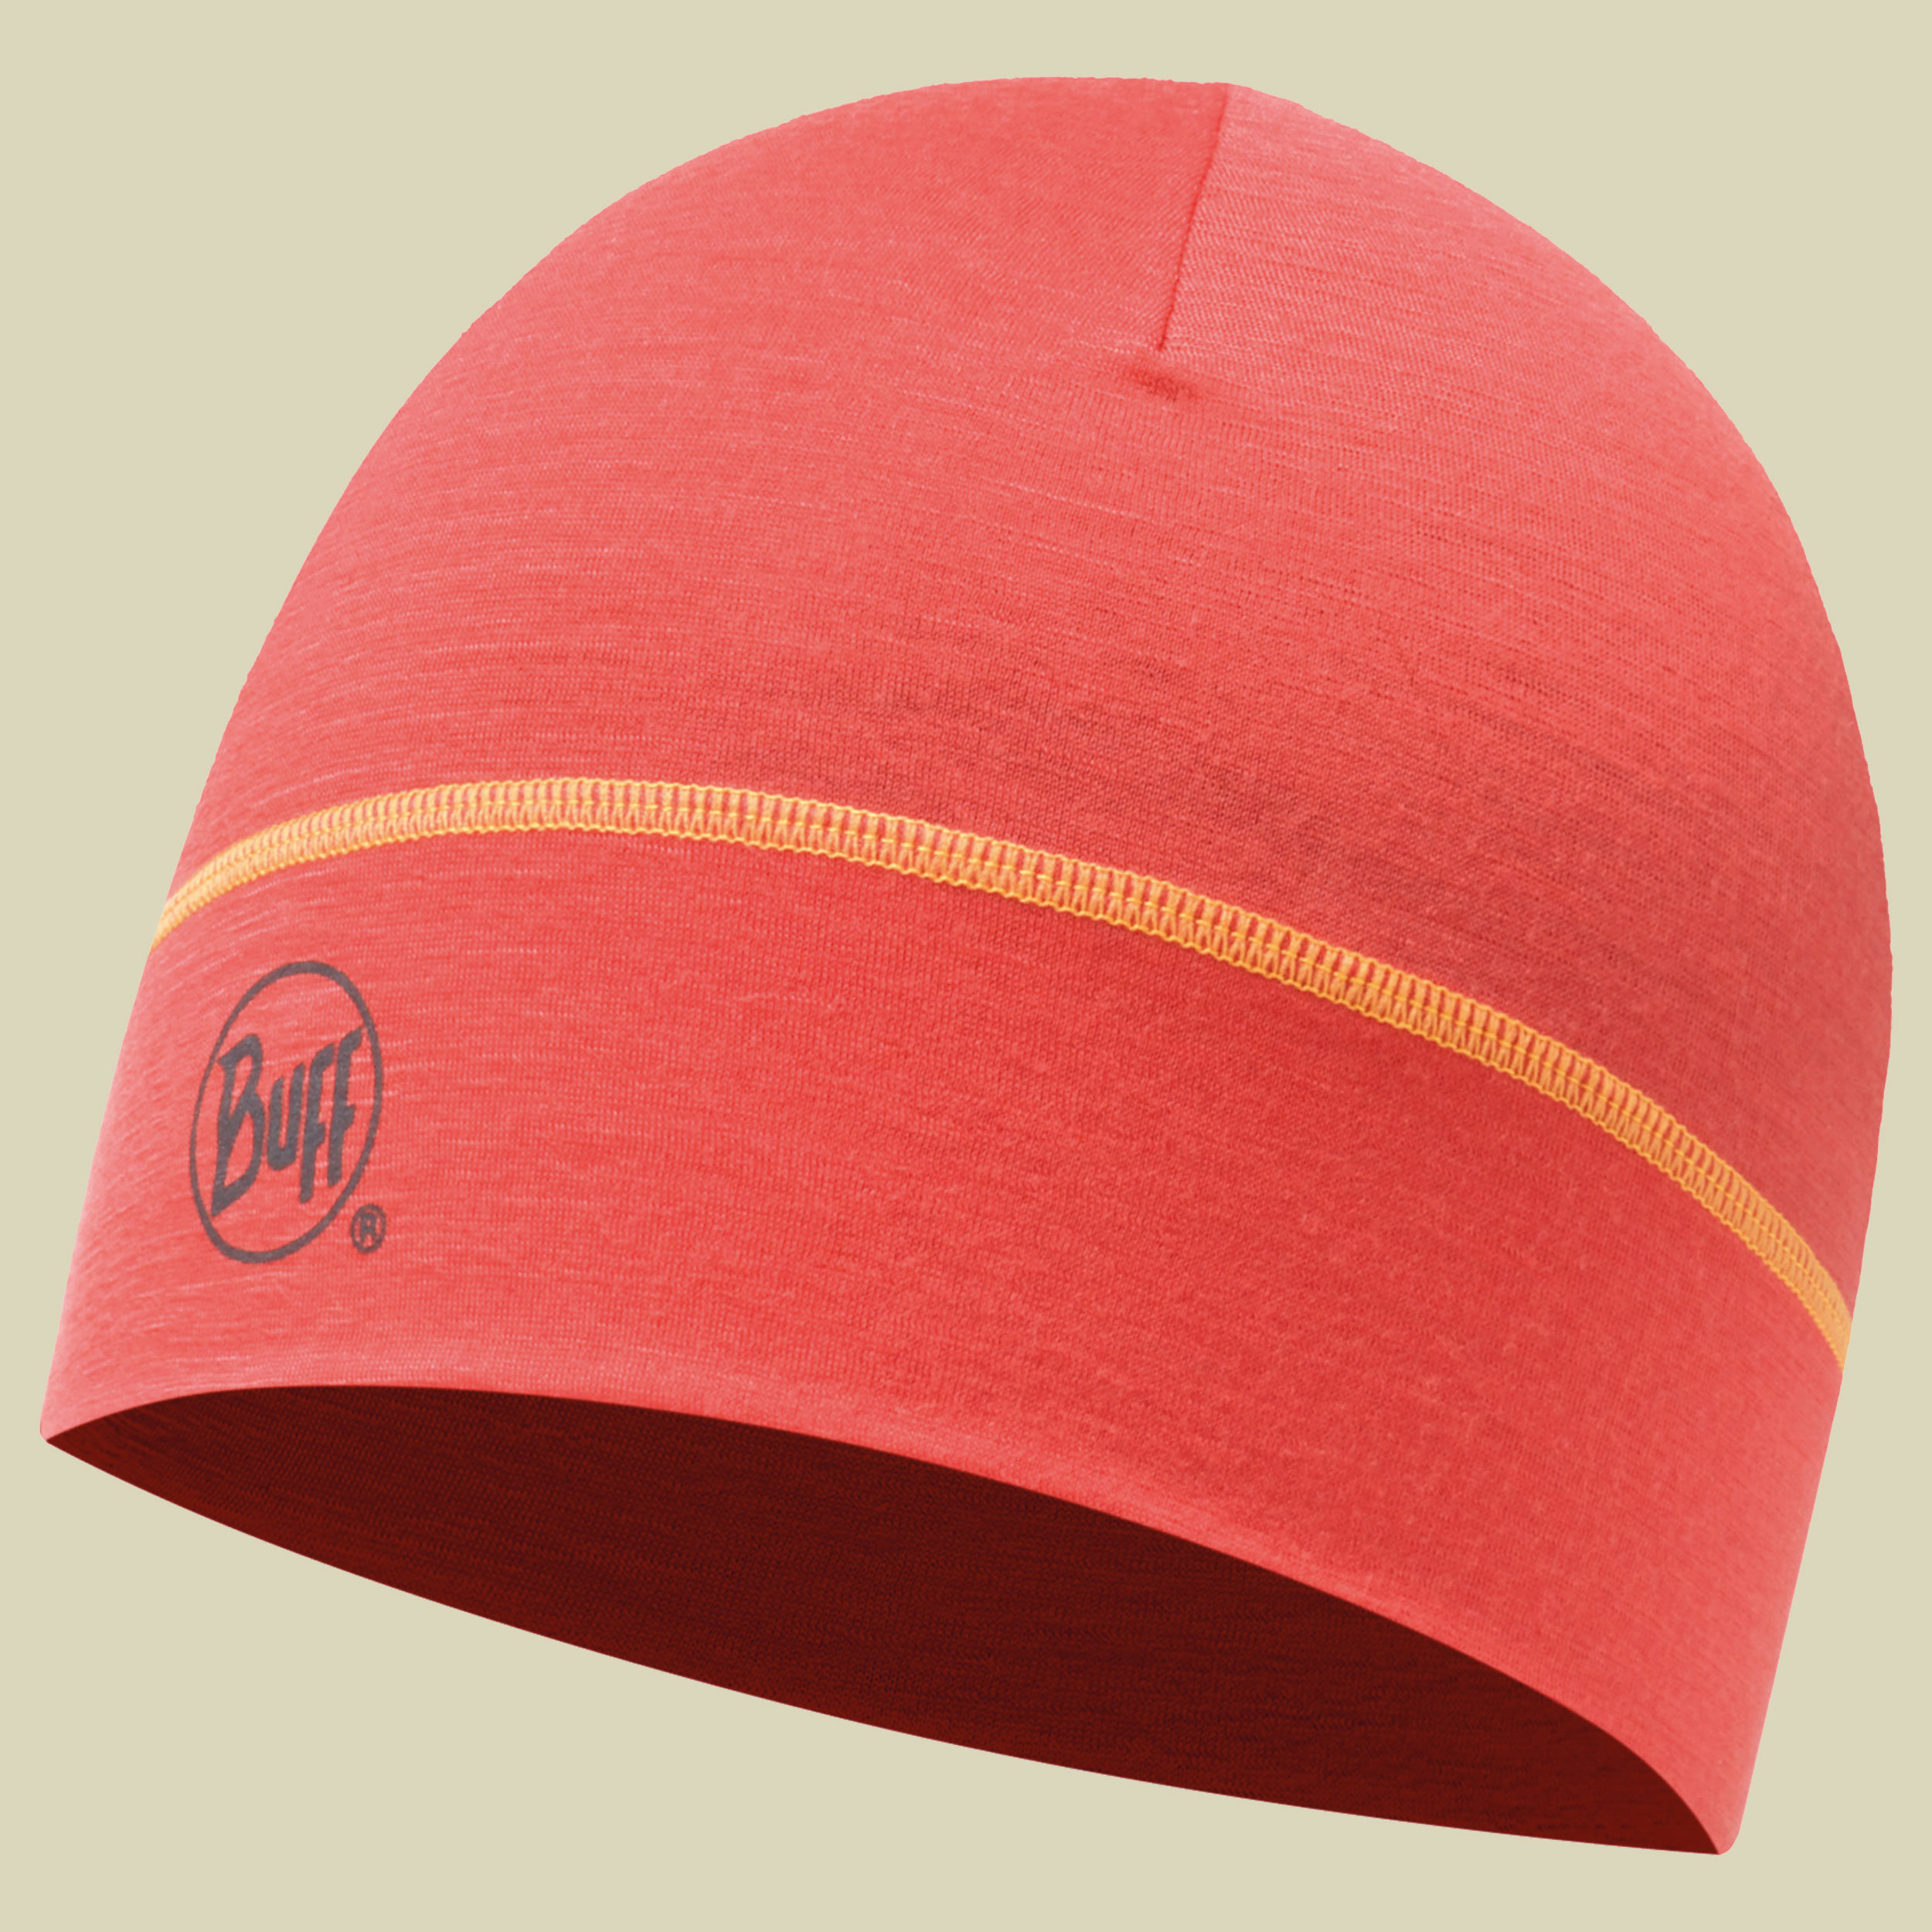 Merino Wool 1 Layer Hat Größe one size Farbe solid coral